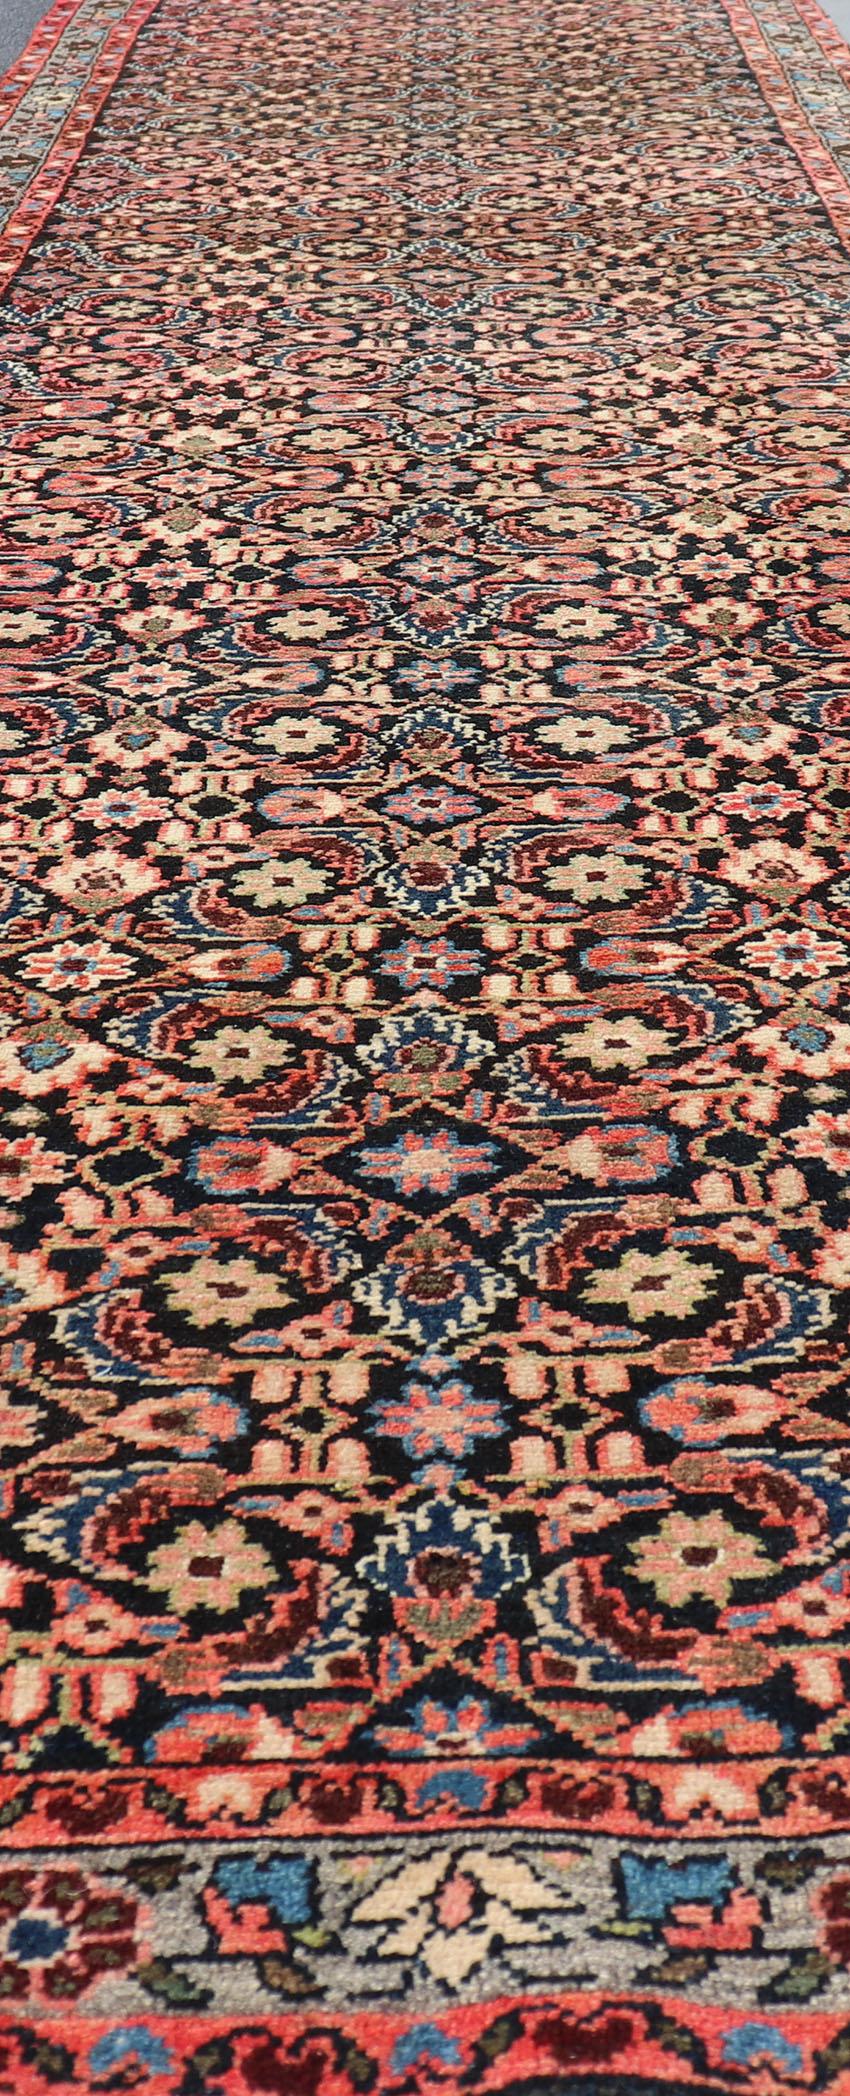 Long Multicolored Vintage Persian Malayer Runner Sub-Geometric Floral Design For Sale 7